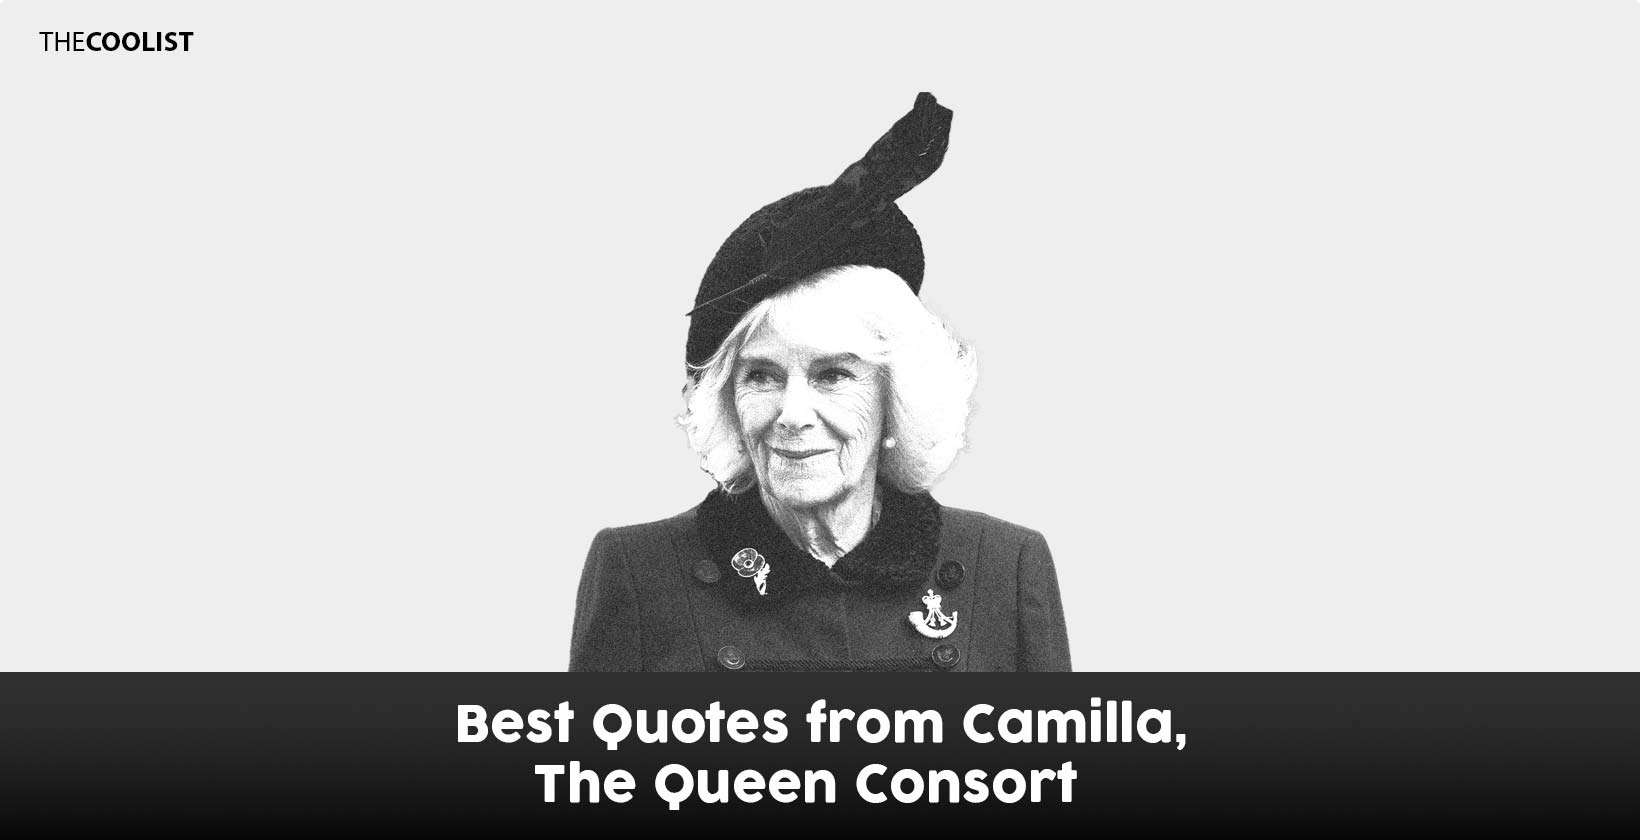 Best Quotes from Camilla, the Queen Consort